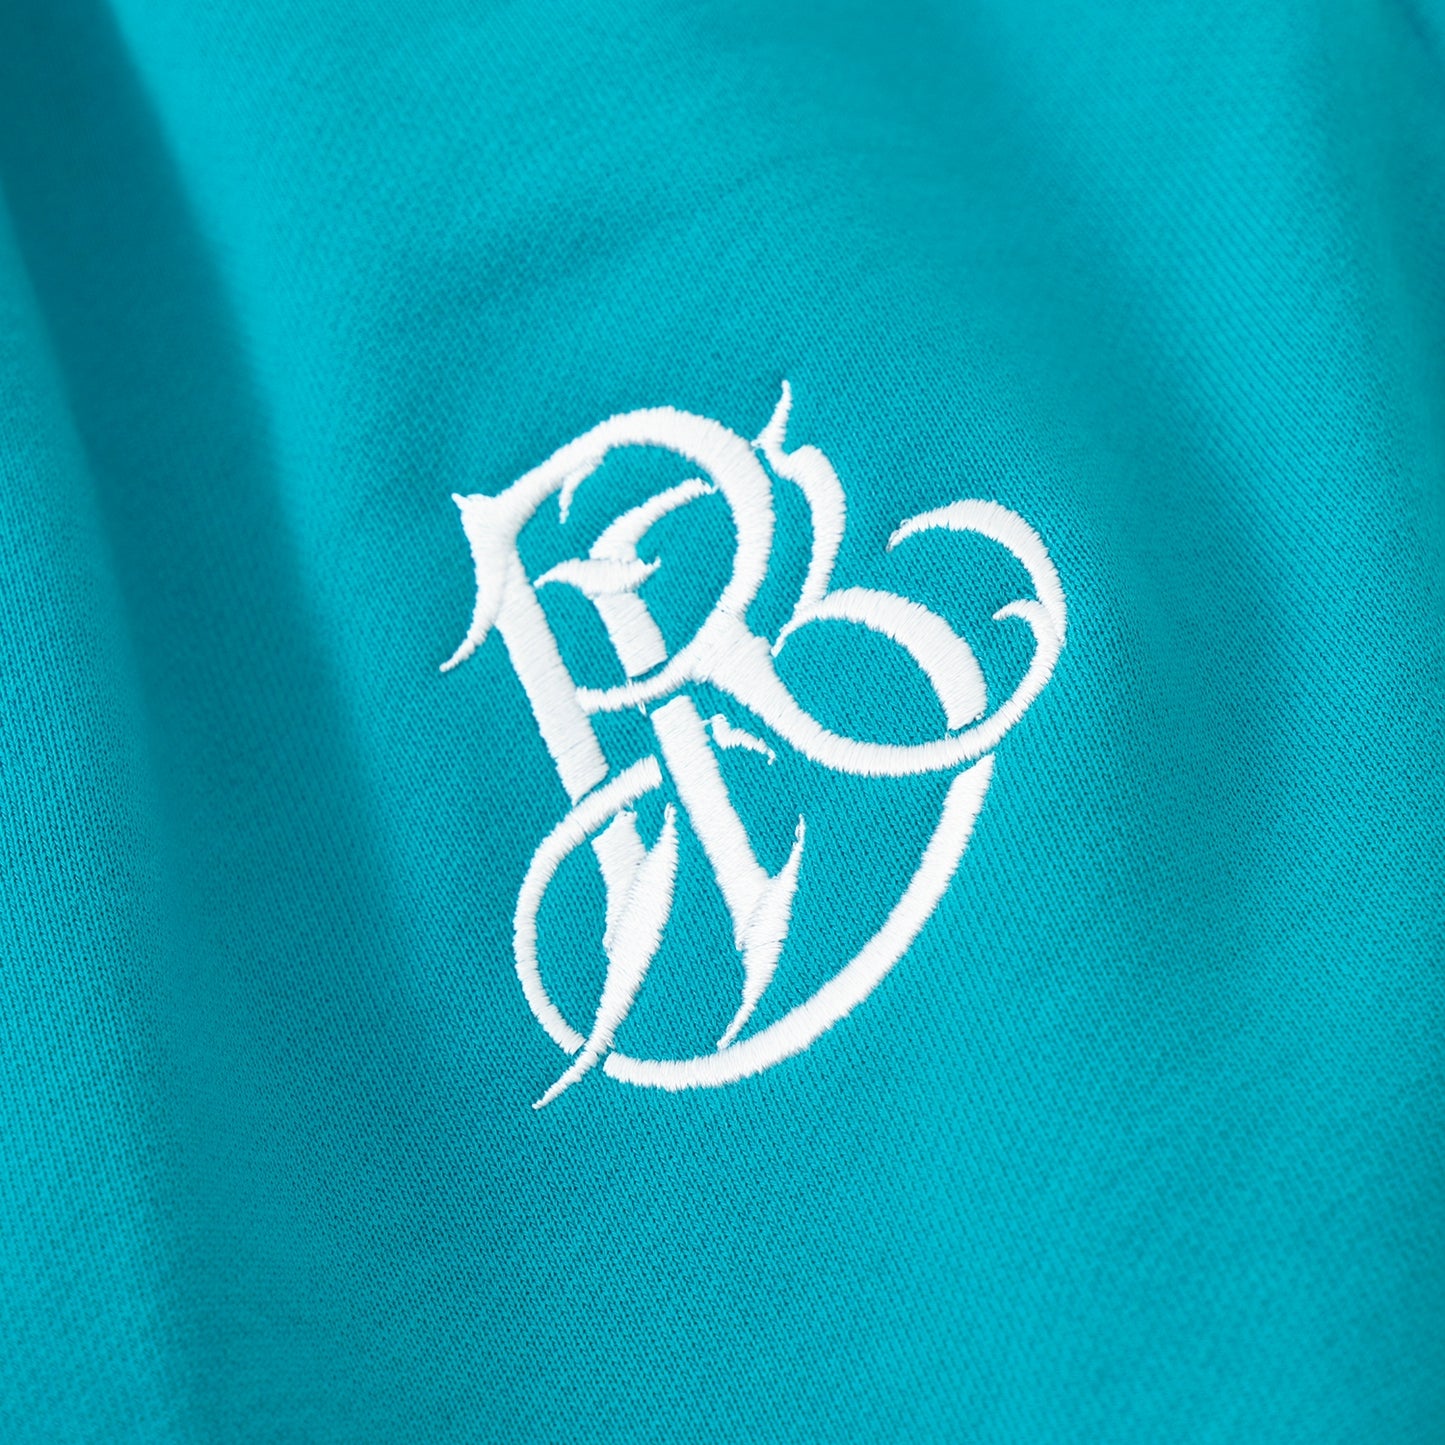 DEE x RBLS RB LOGO EMBROIDERY SWEAT PANTS